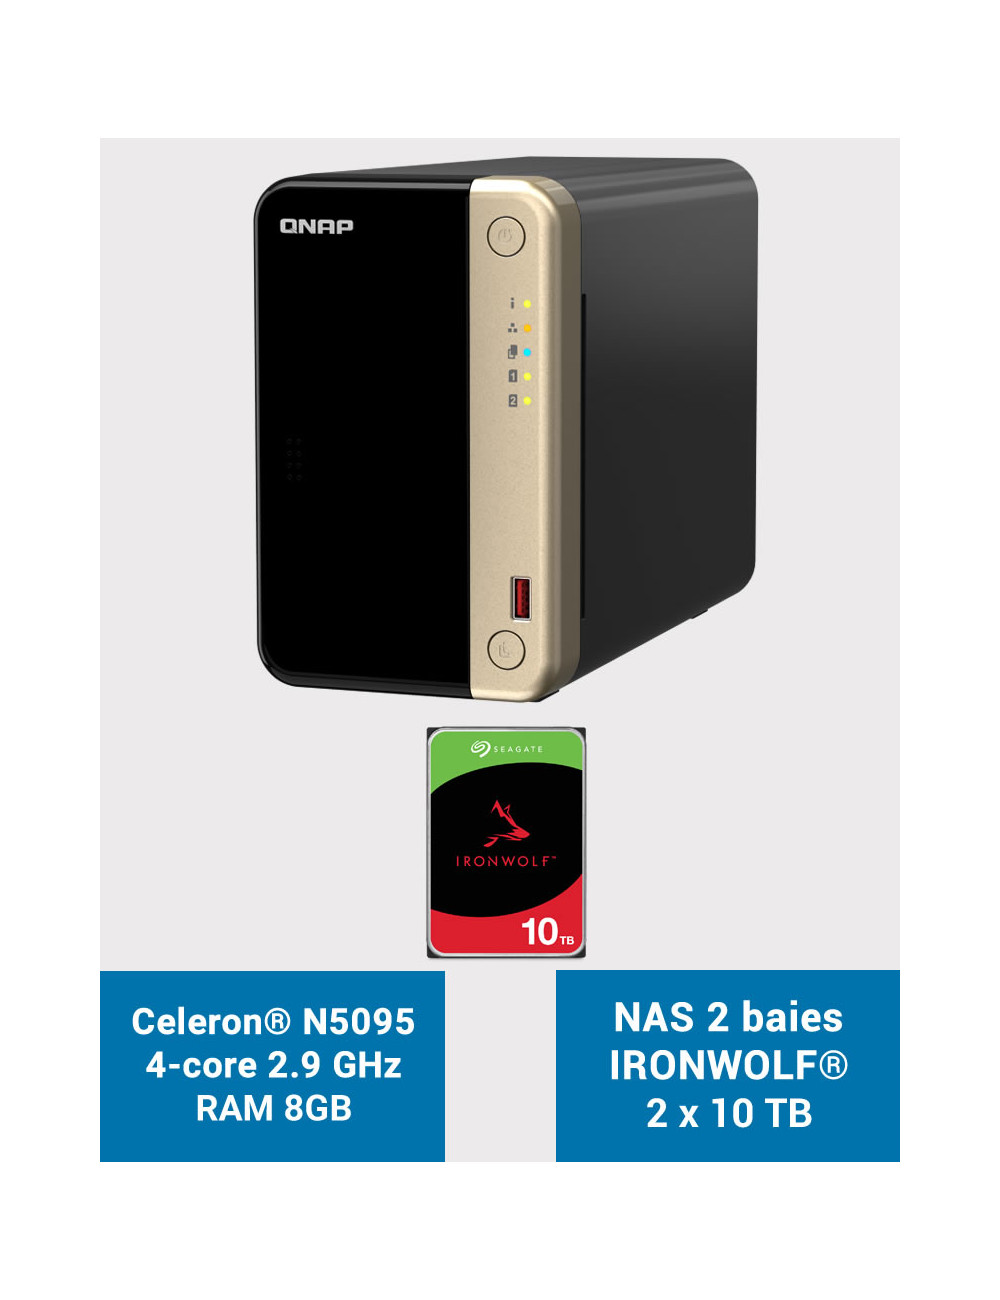 QNAP TS-264 8GB Serveur NAS 2 baies IRONWOLF 20To (2x10To)